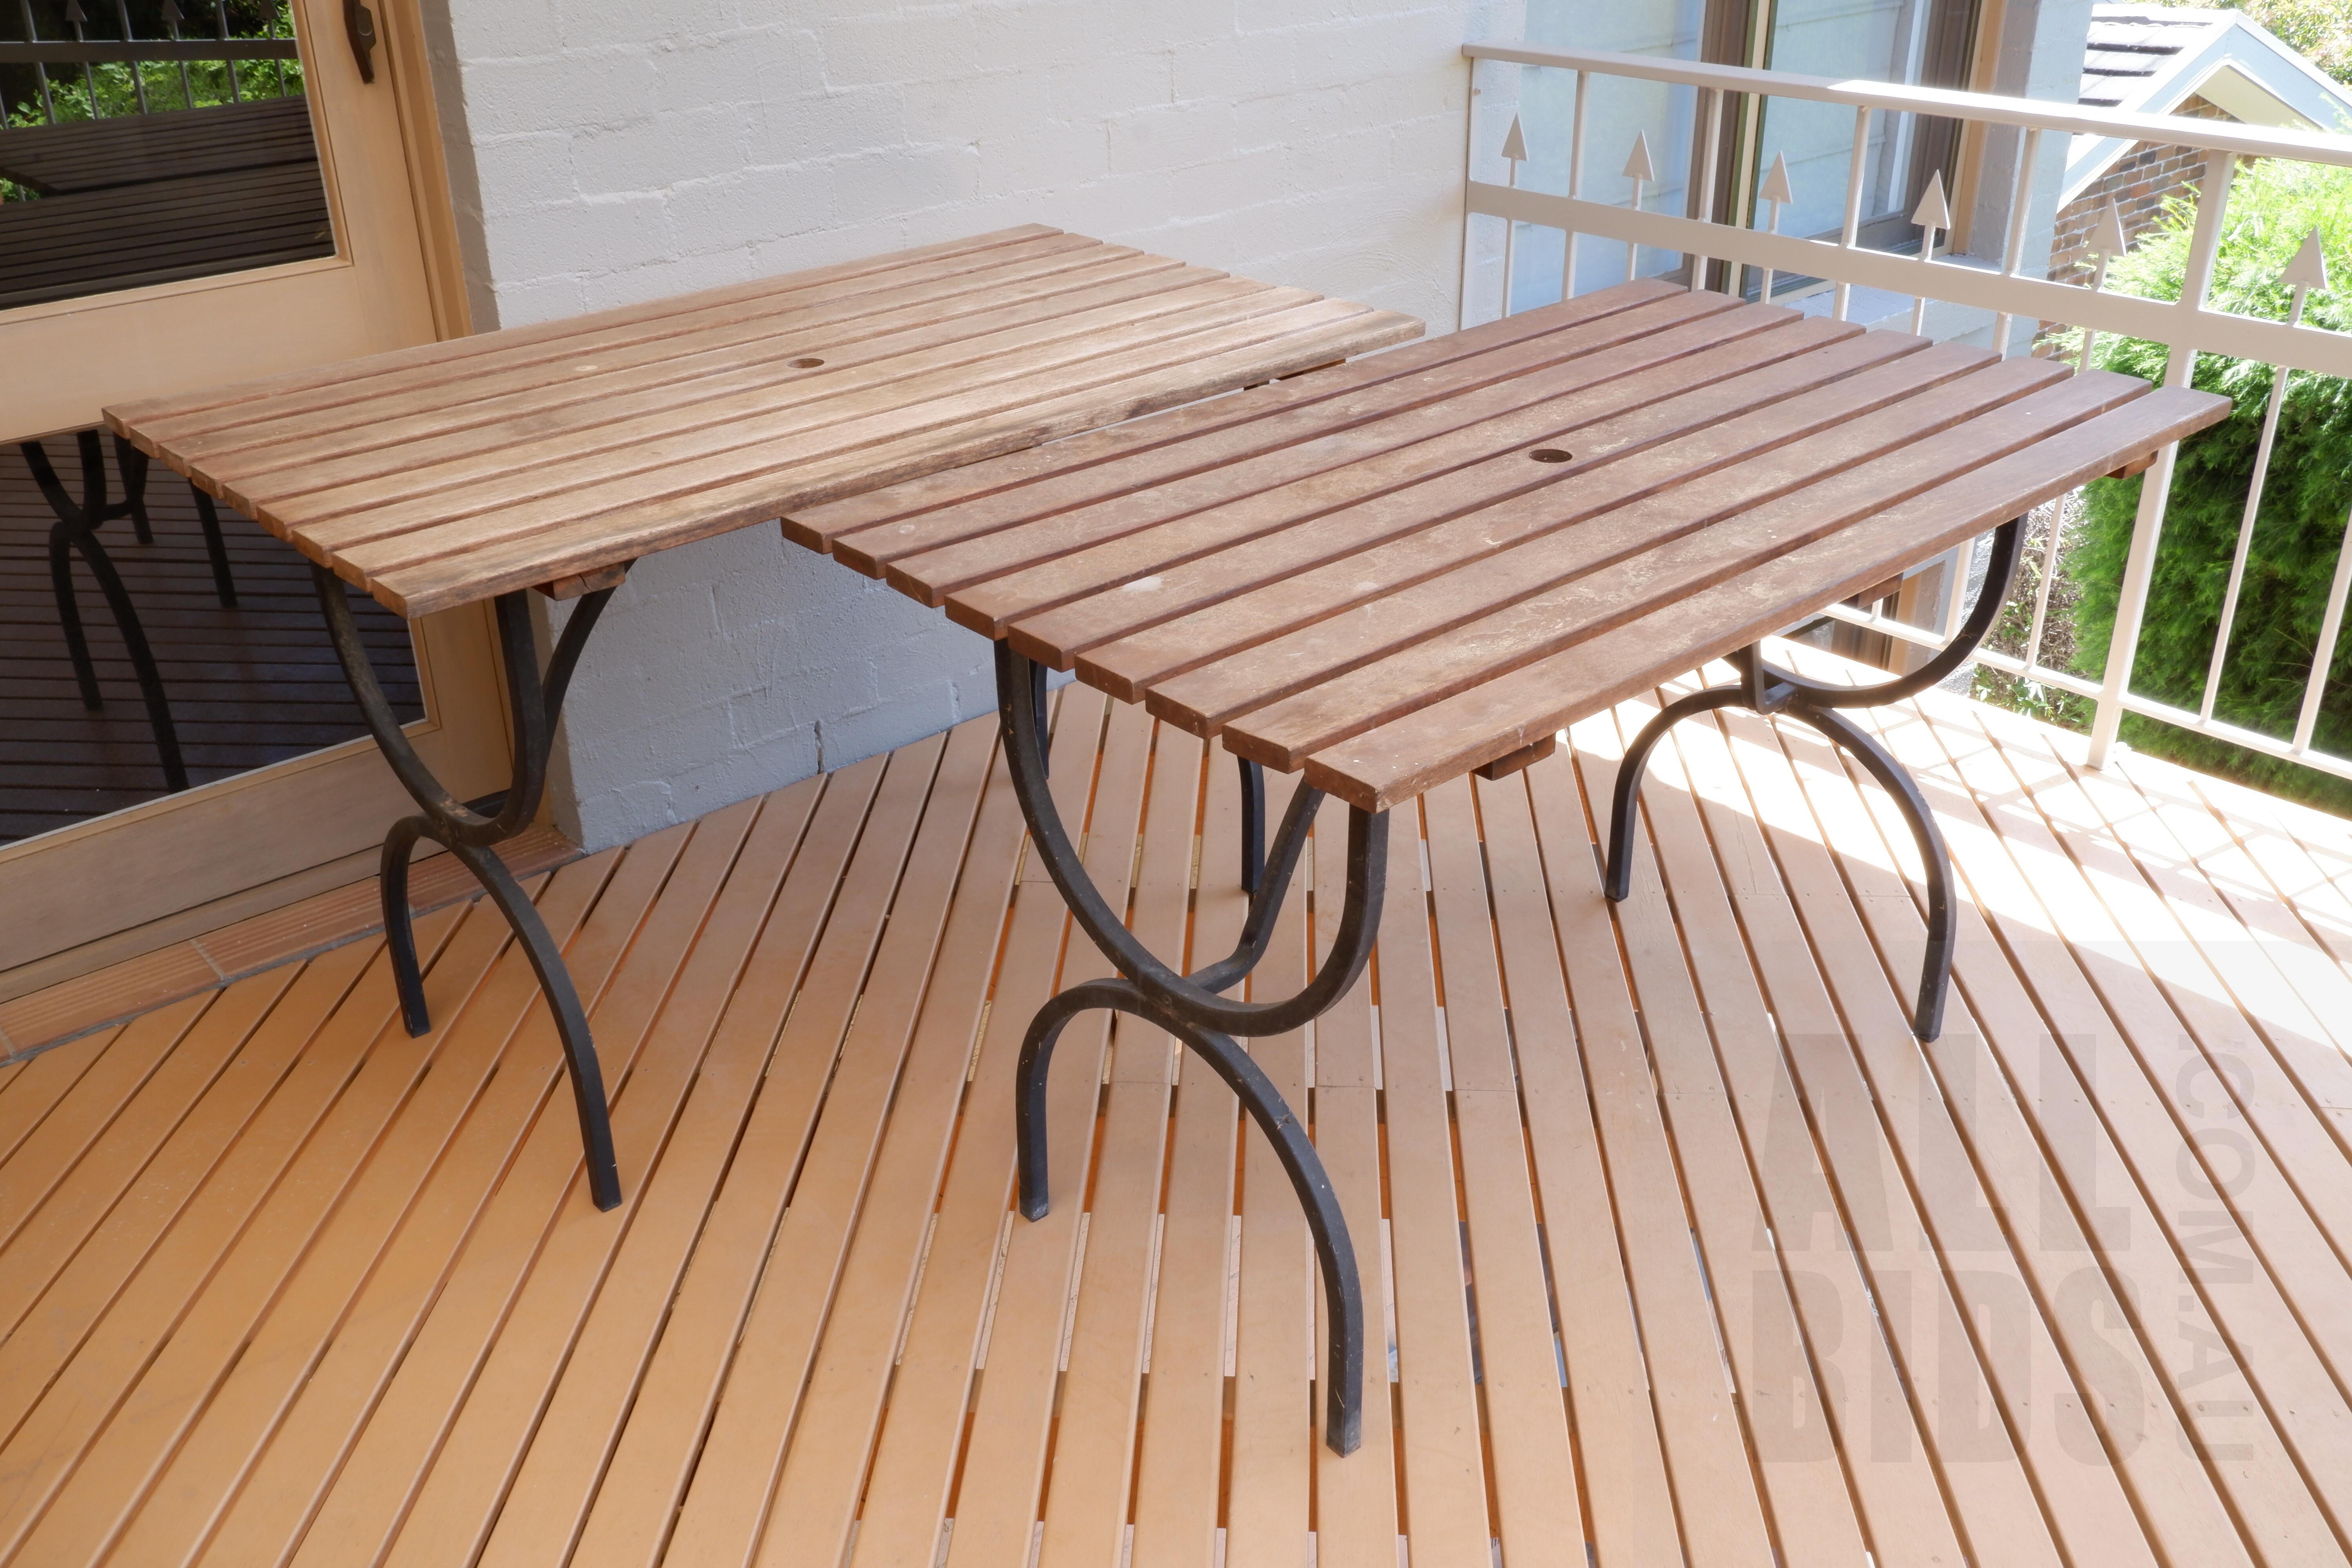 'Pair of Bespoke Wrought Metal and Hardwood Outdoor Tables'